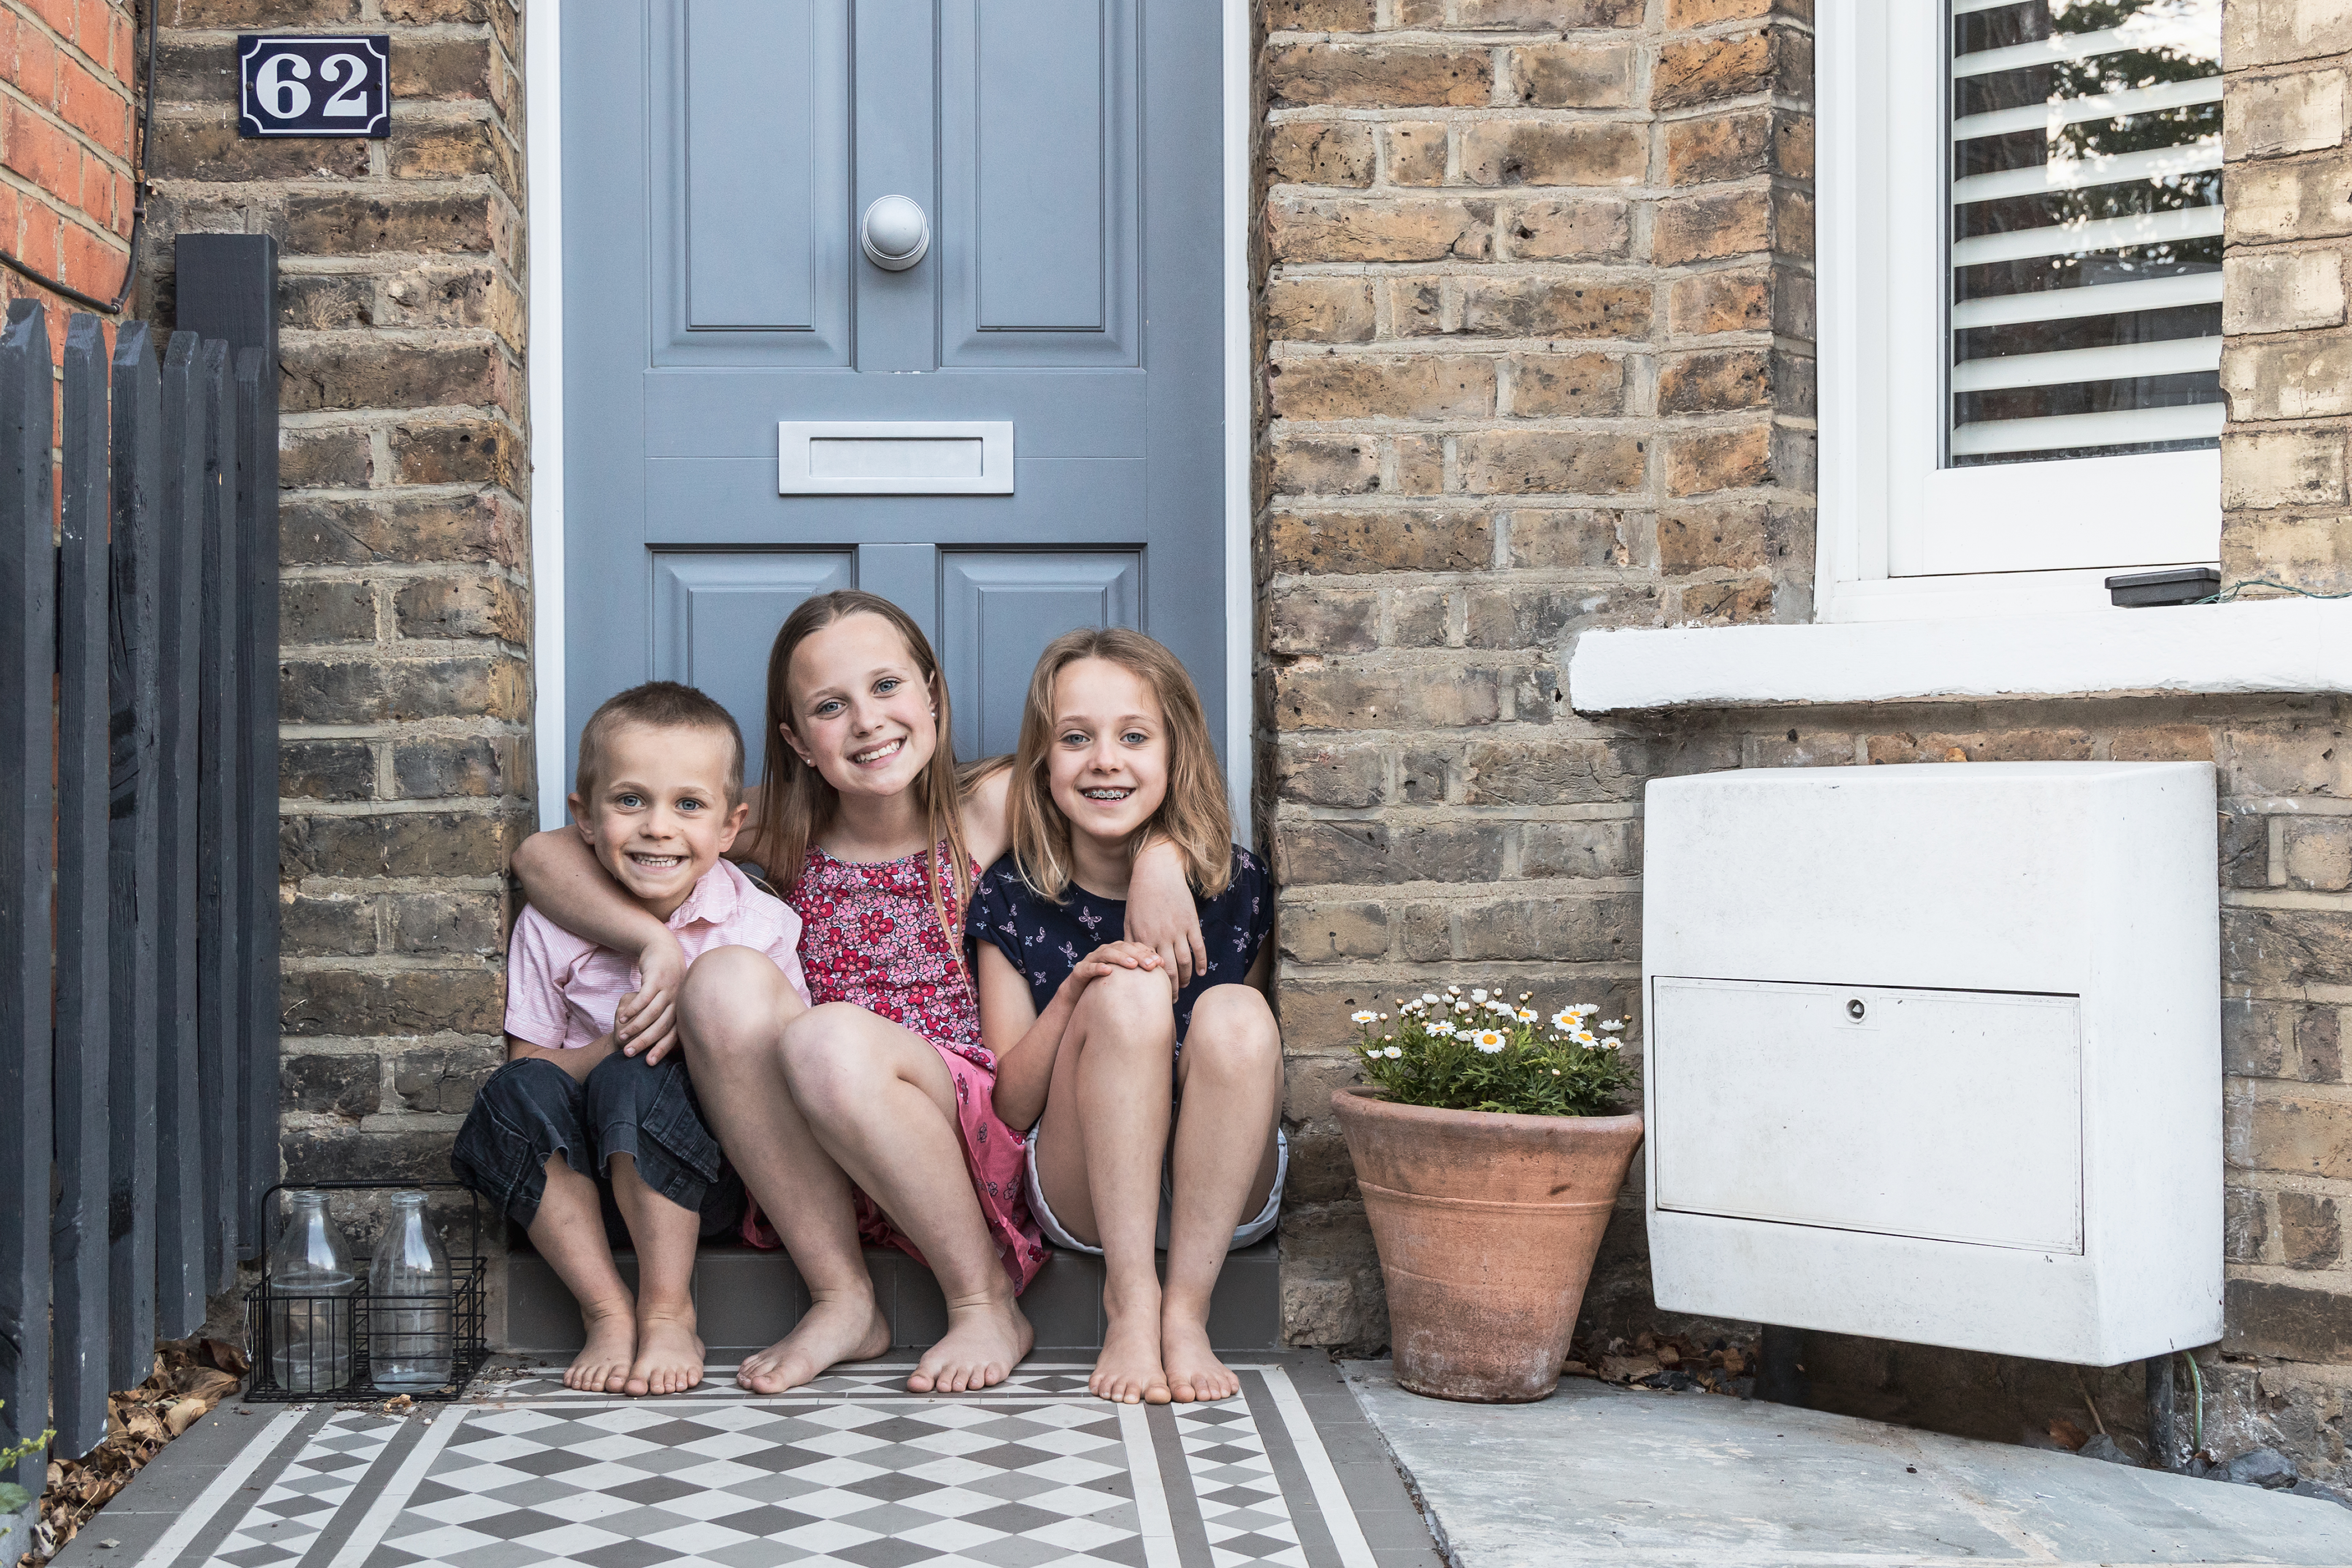 Local resident and photographer Rebekah Kennington came up with the wonderful idea to take pictures during this pandemic so that she could provide local families with a positive memory from lockdown whilst raising money for The League of Friends of Teddington Memorial Hospital.